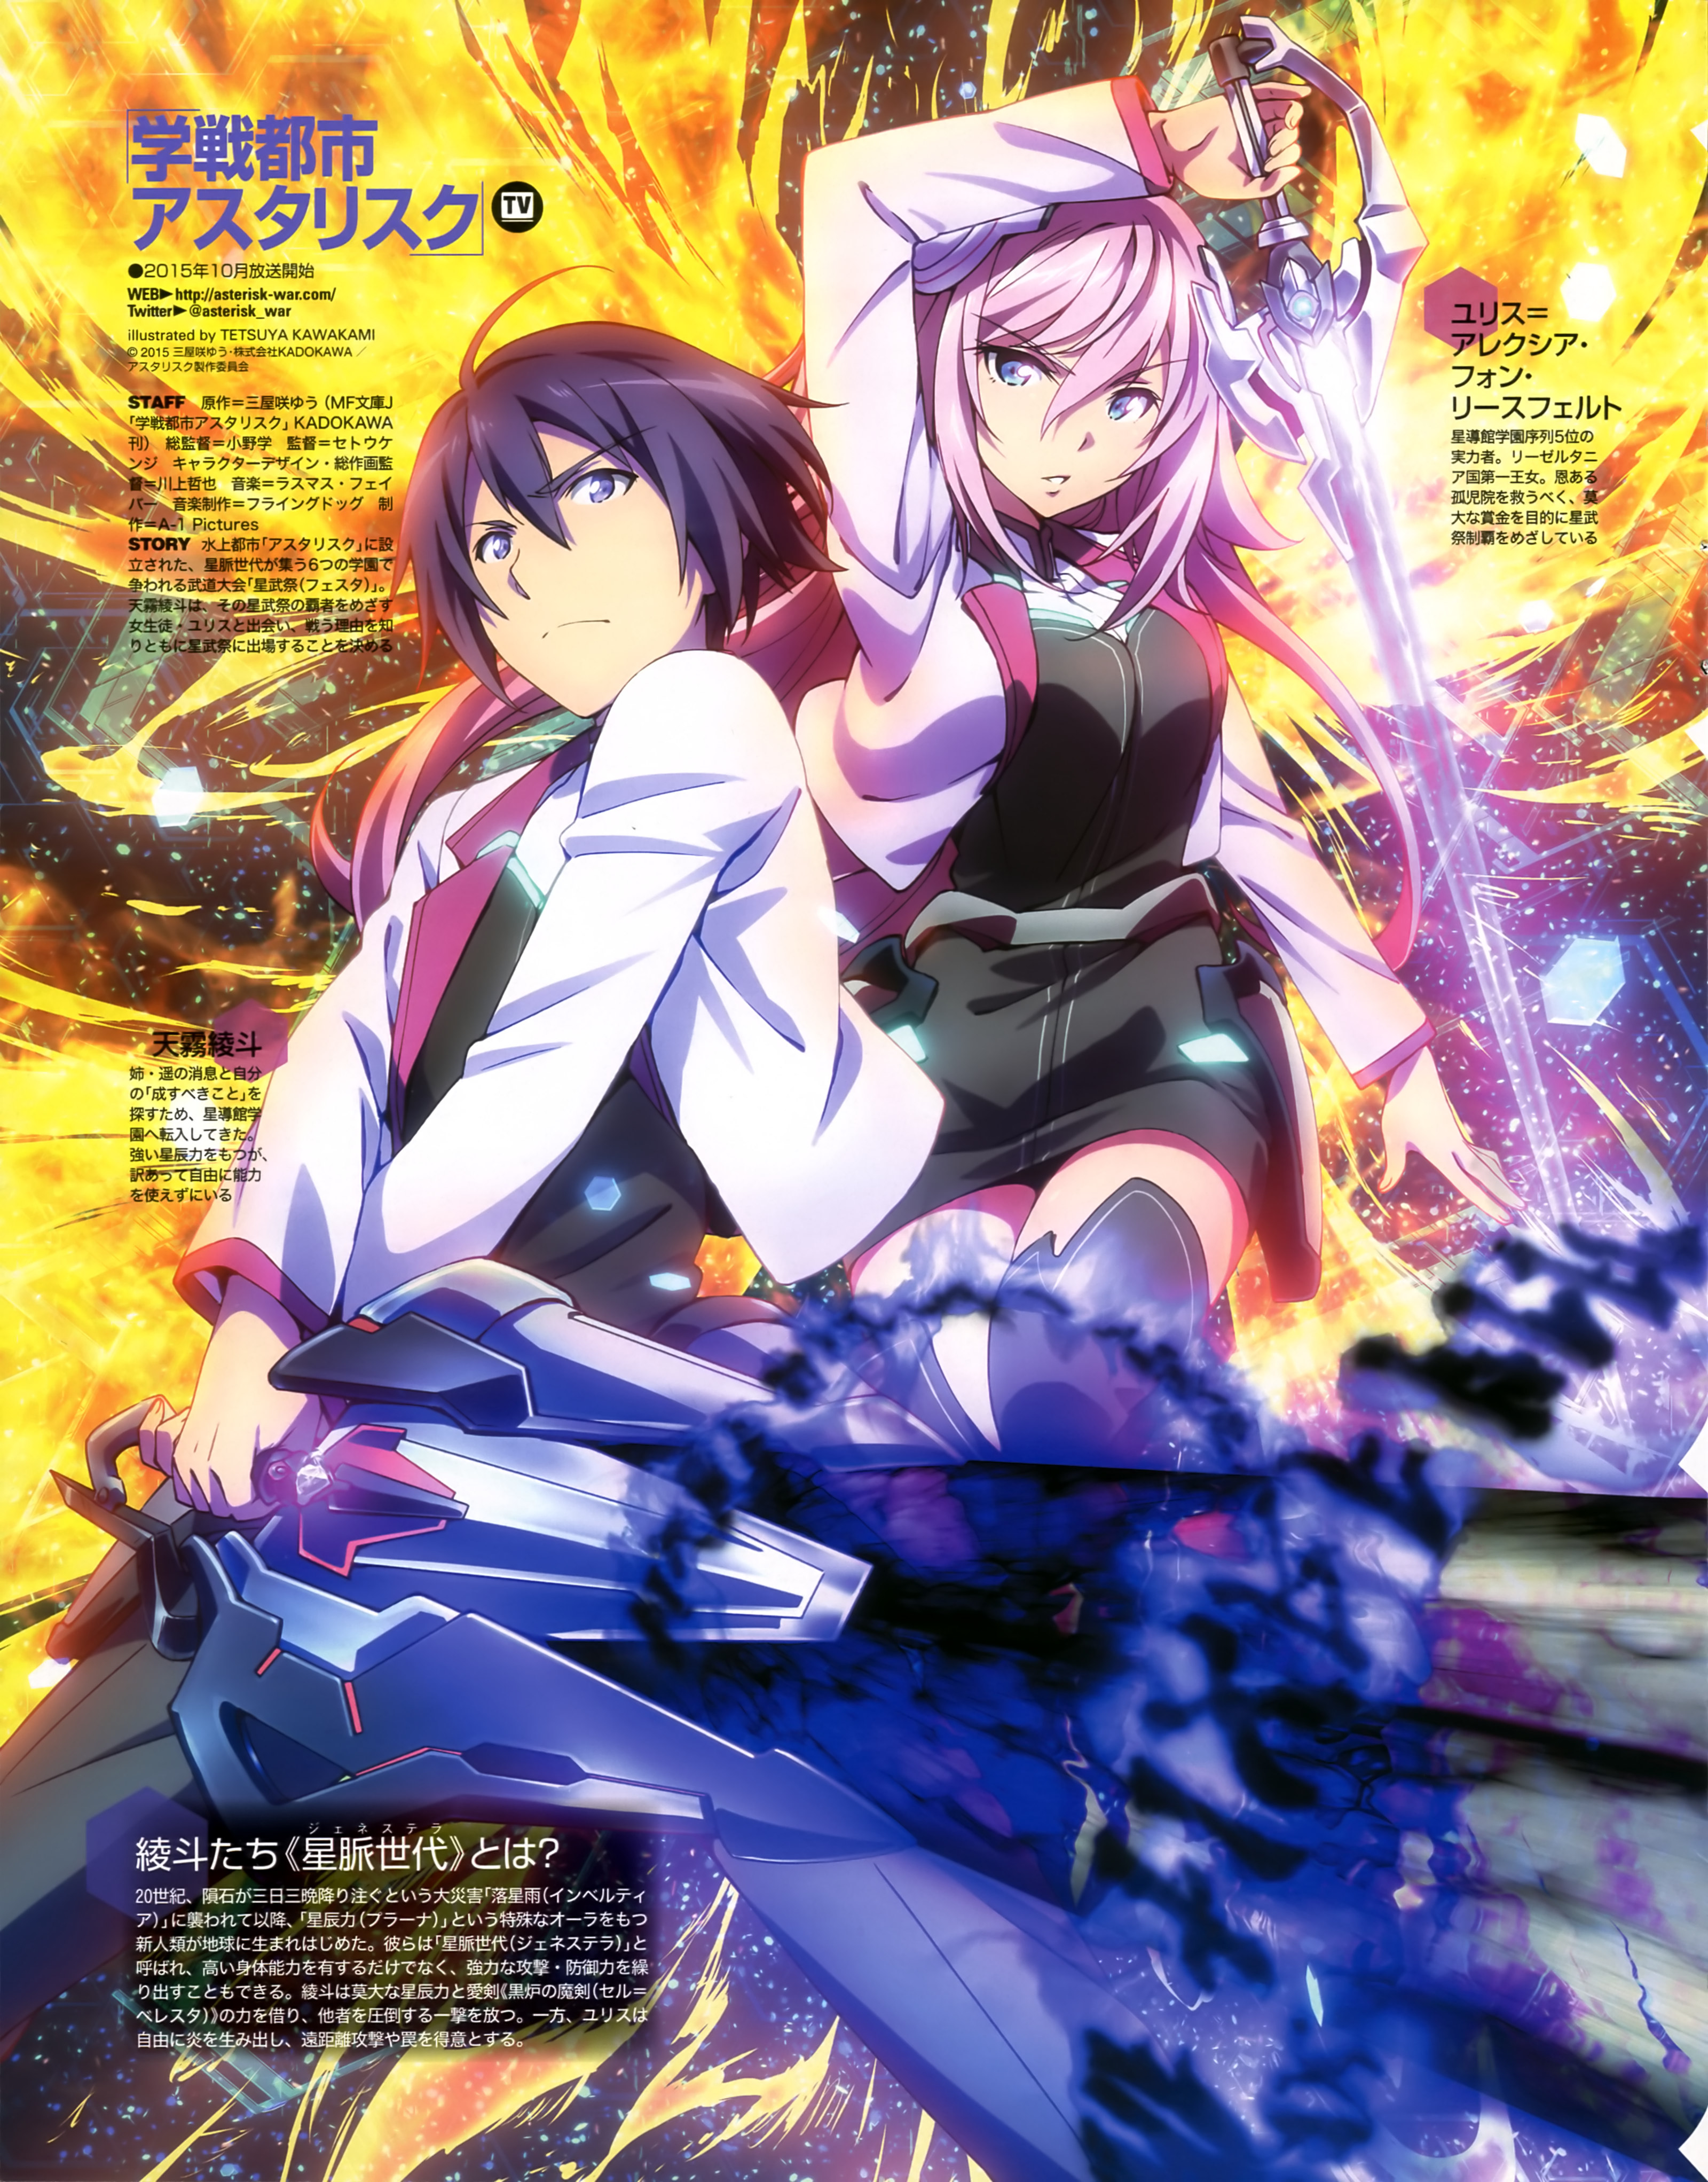 Gakusen Toshi Asterisk character design Claudia Enfield - Haruhichan  Network - Anime news and more!